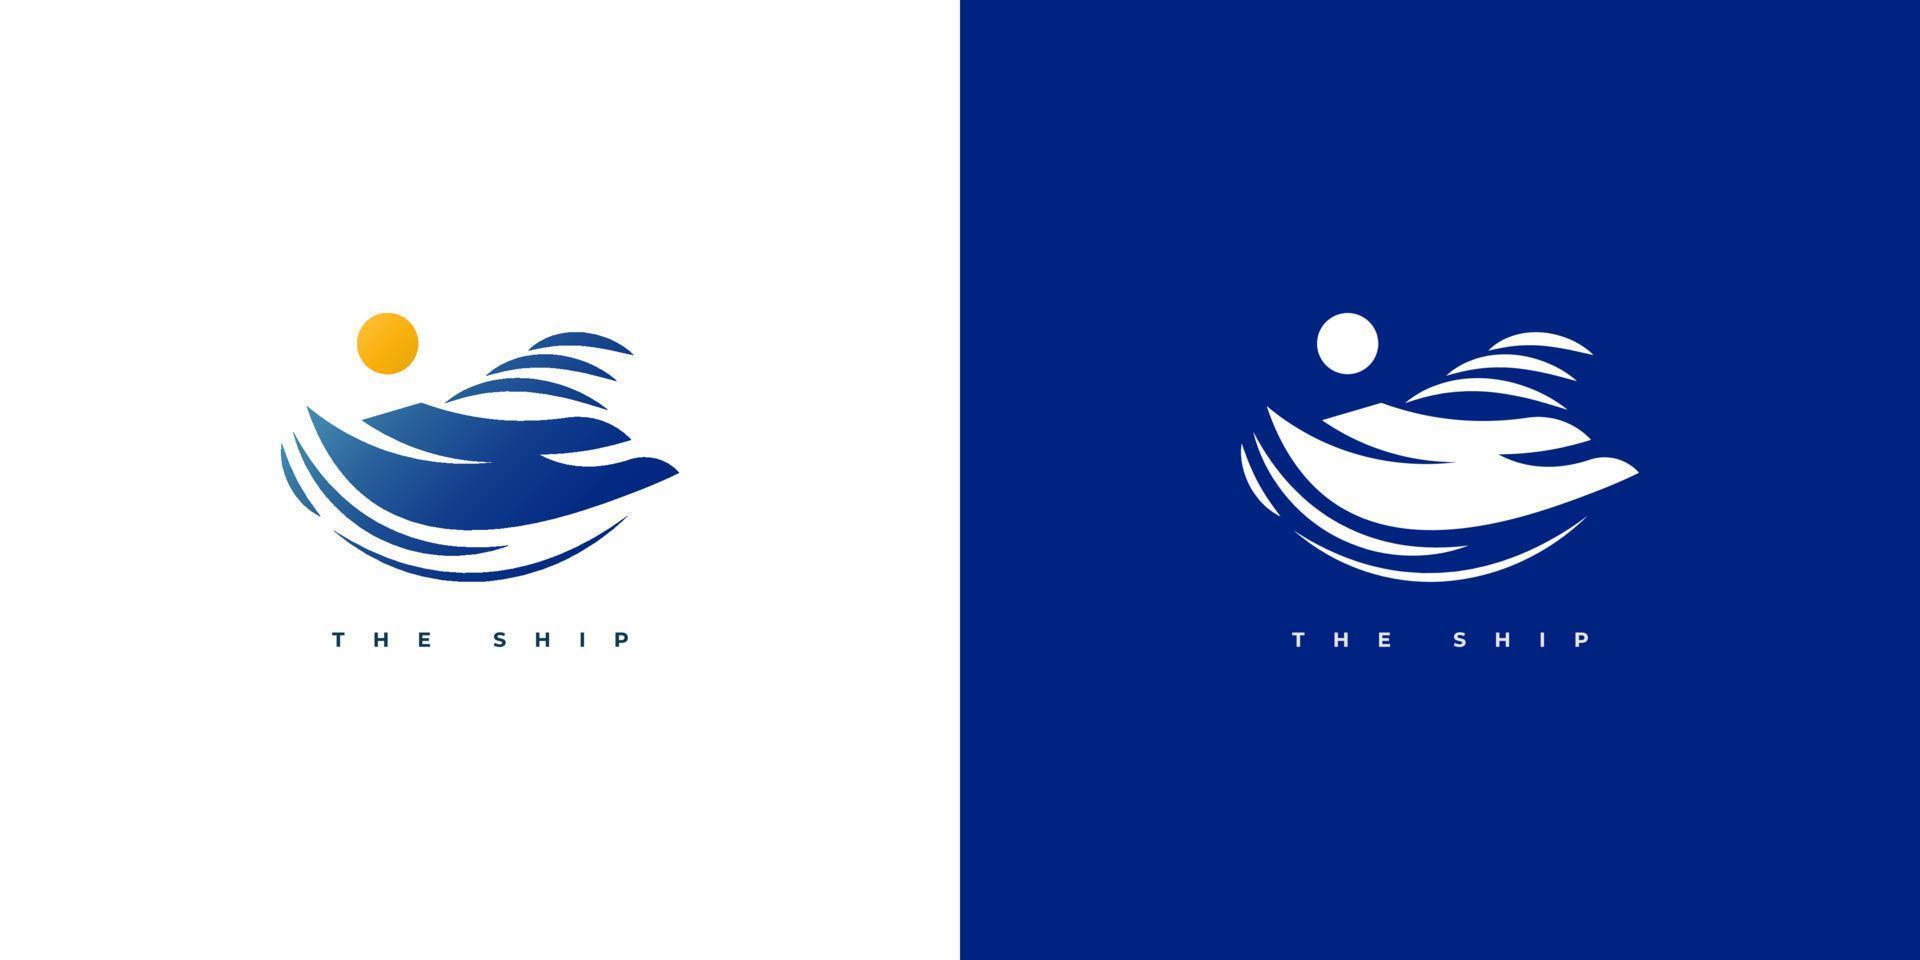 Abstract and Elegant Ship Logo Design in Blue Gradient Style. Yacht or Cruise Logo for Travel or Tourism Industry Brand Identity vector